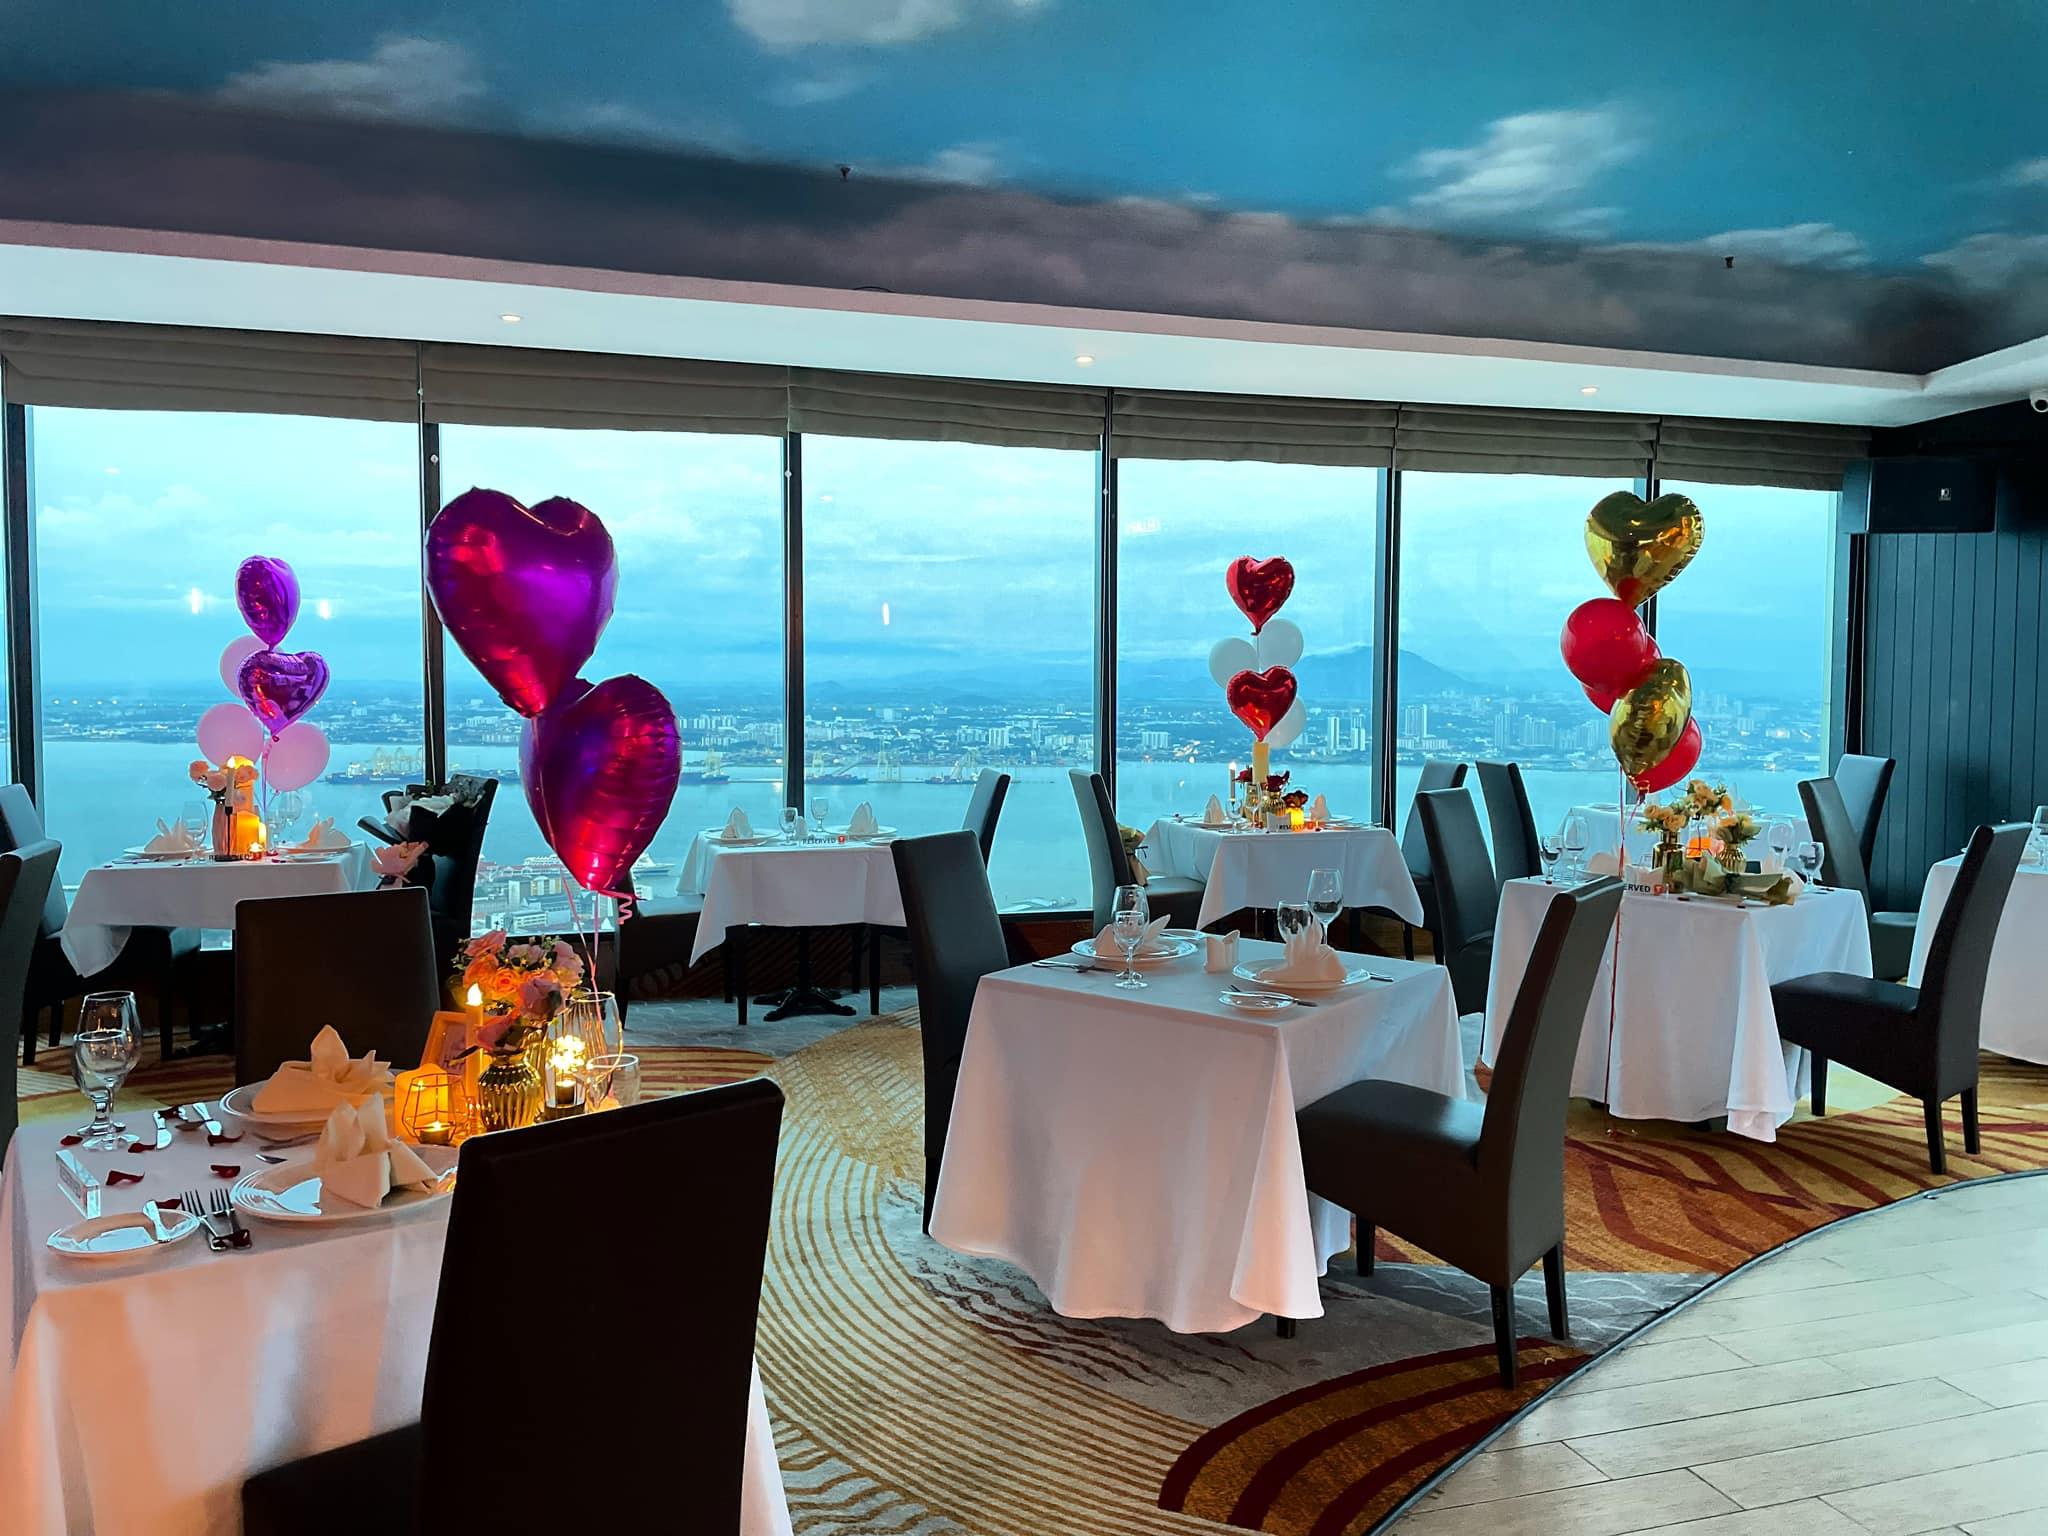 A fancy restaurant decorated for Valentine’s Day | Wedifys